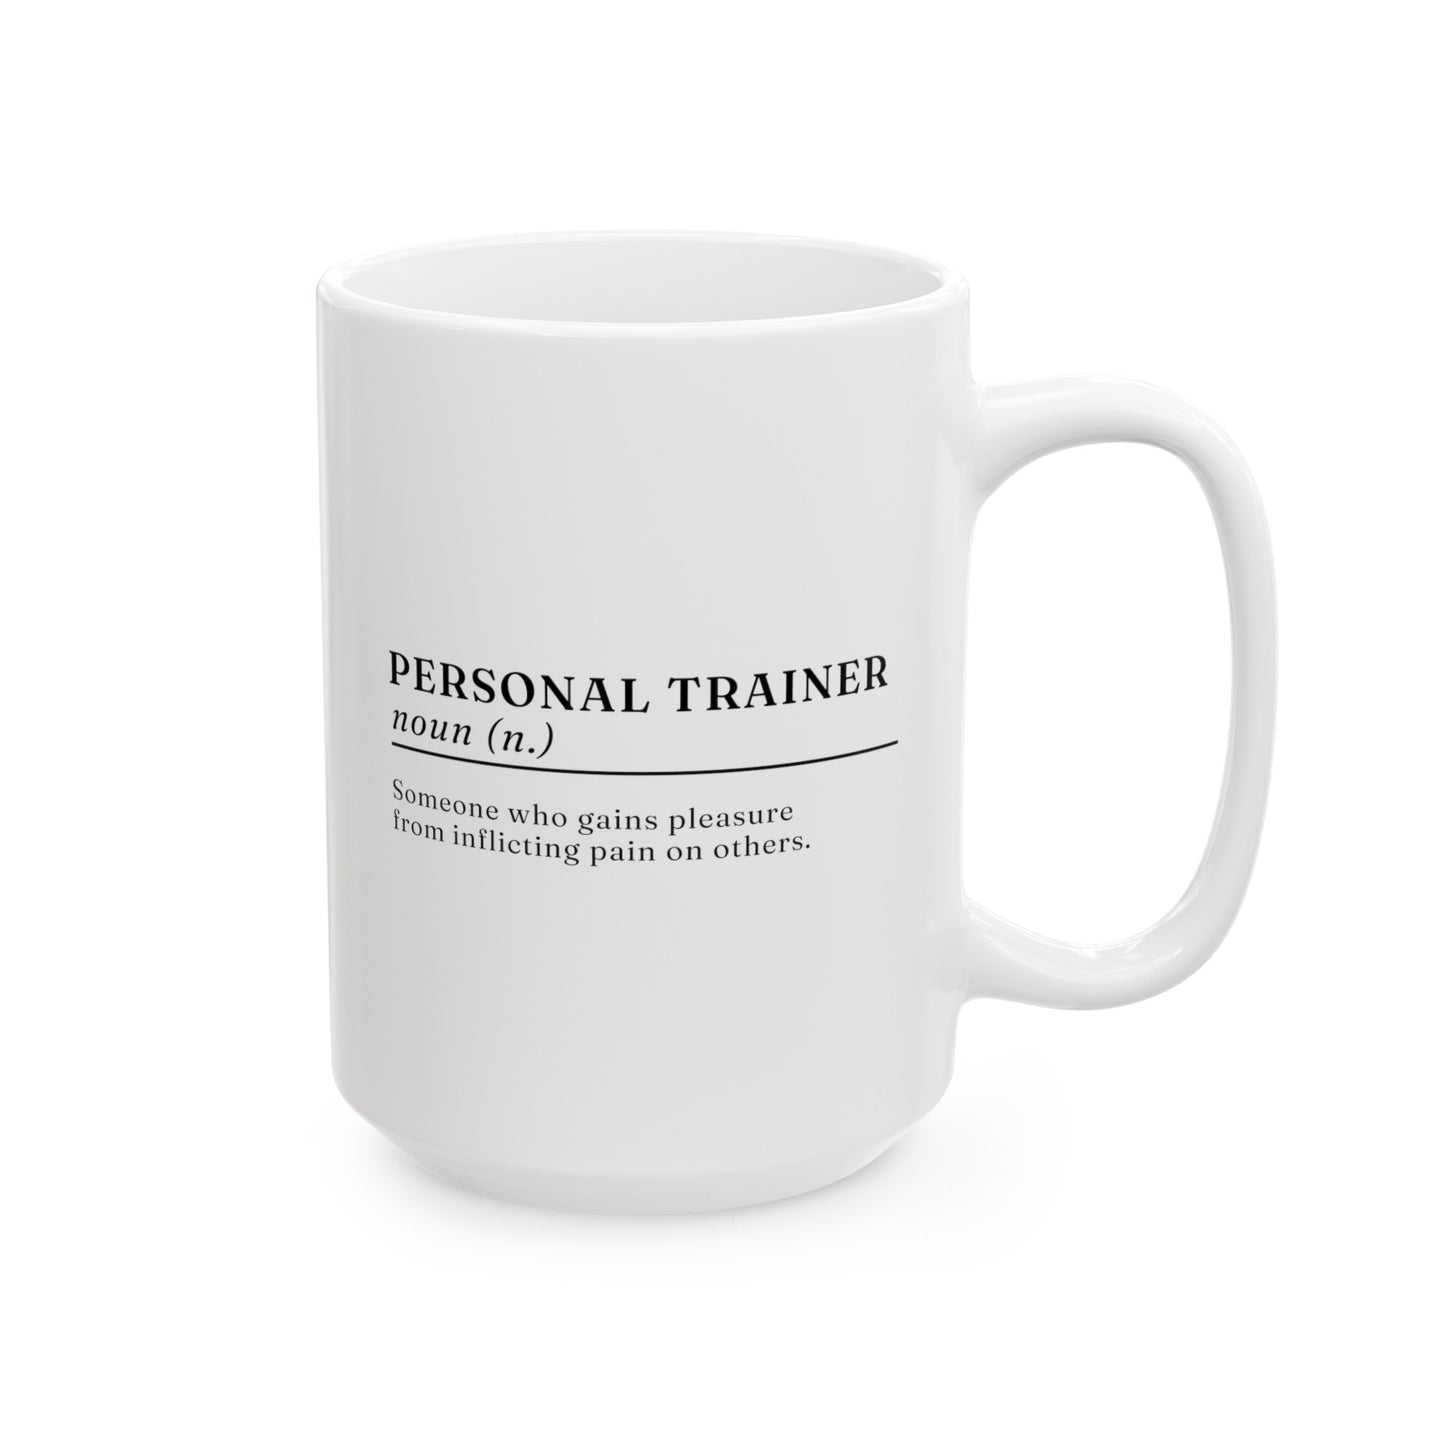 Personal Trainer Definition 15oz white funny large coffee mug gift for fitness instructor exercise workout waveywares wavey wares wavywares wavy wares